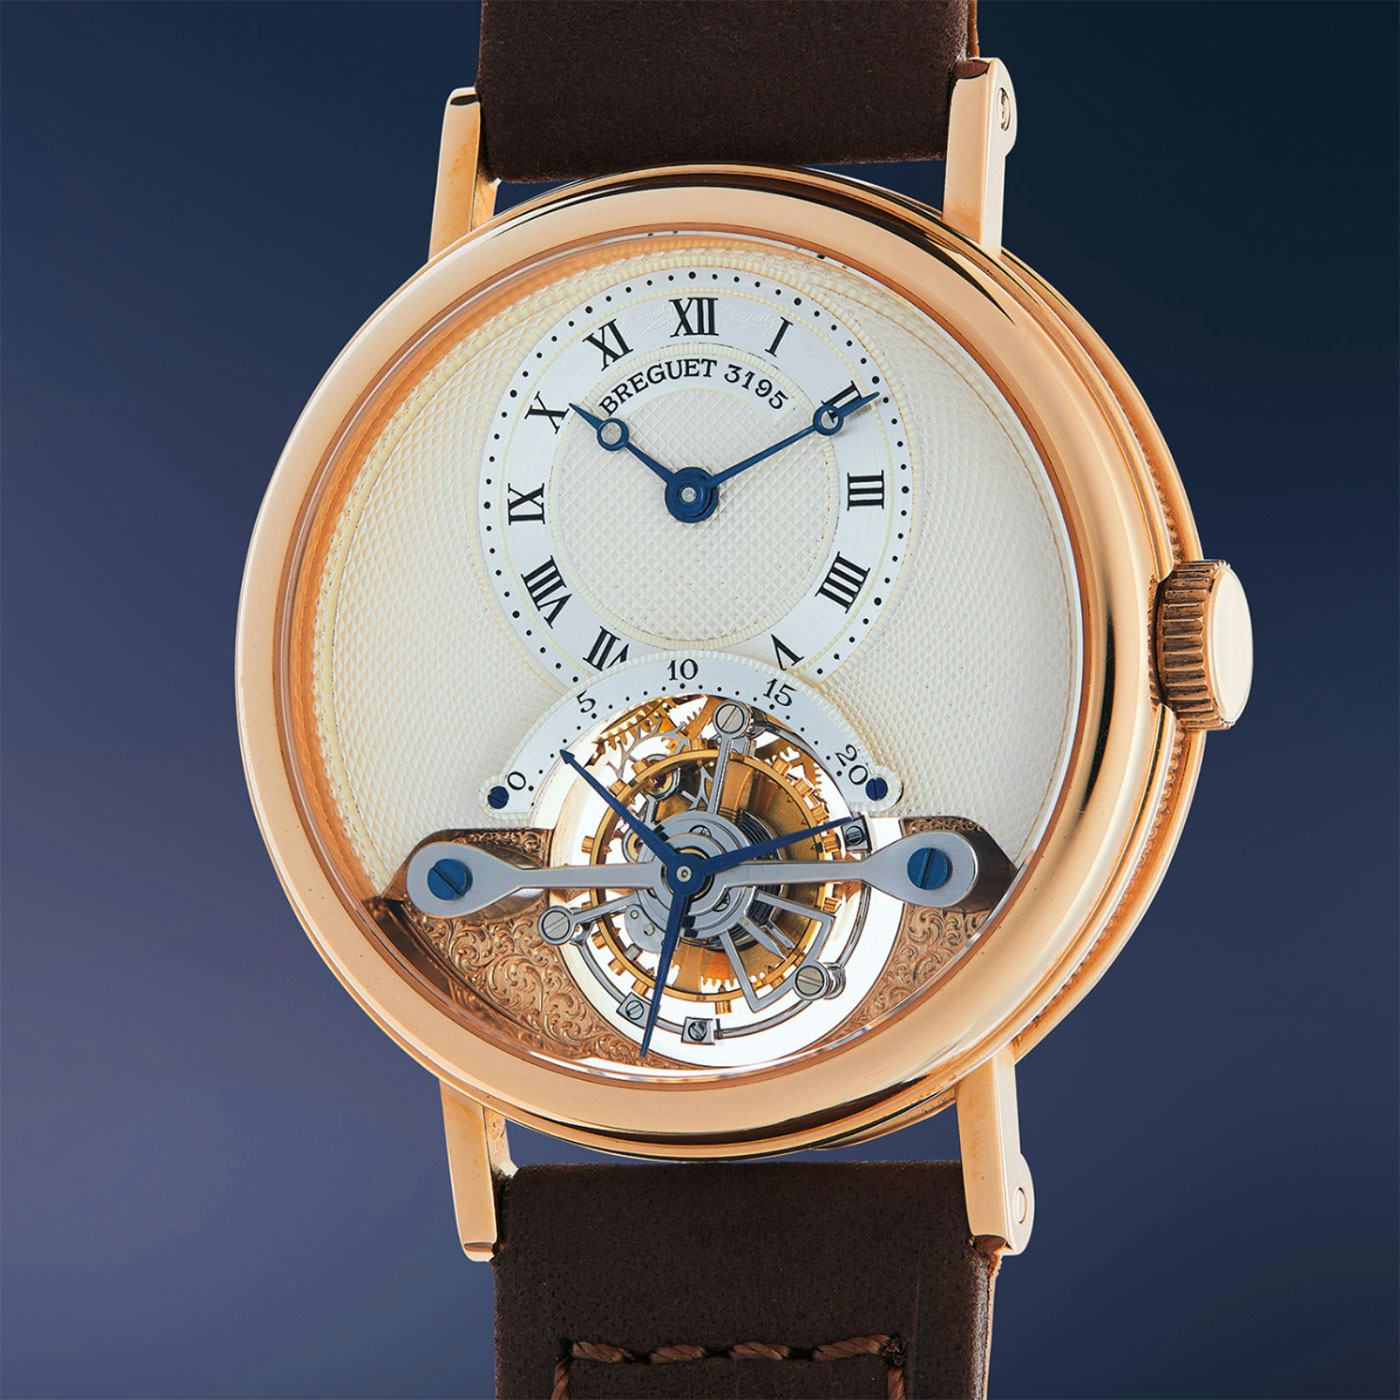 HODINKEE Editor in Chief Jack Forster reviews the Louis Vuitton